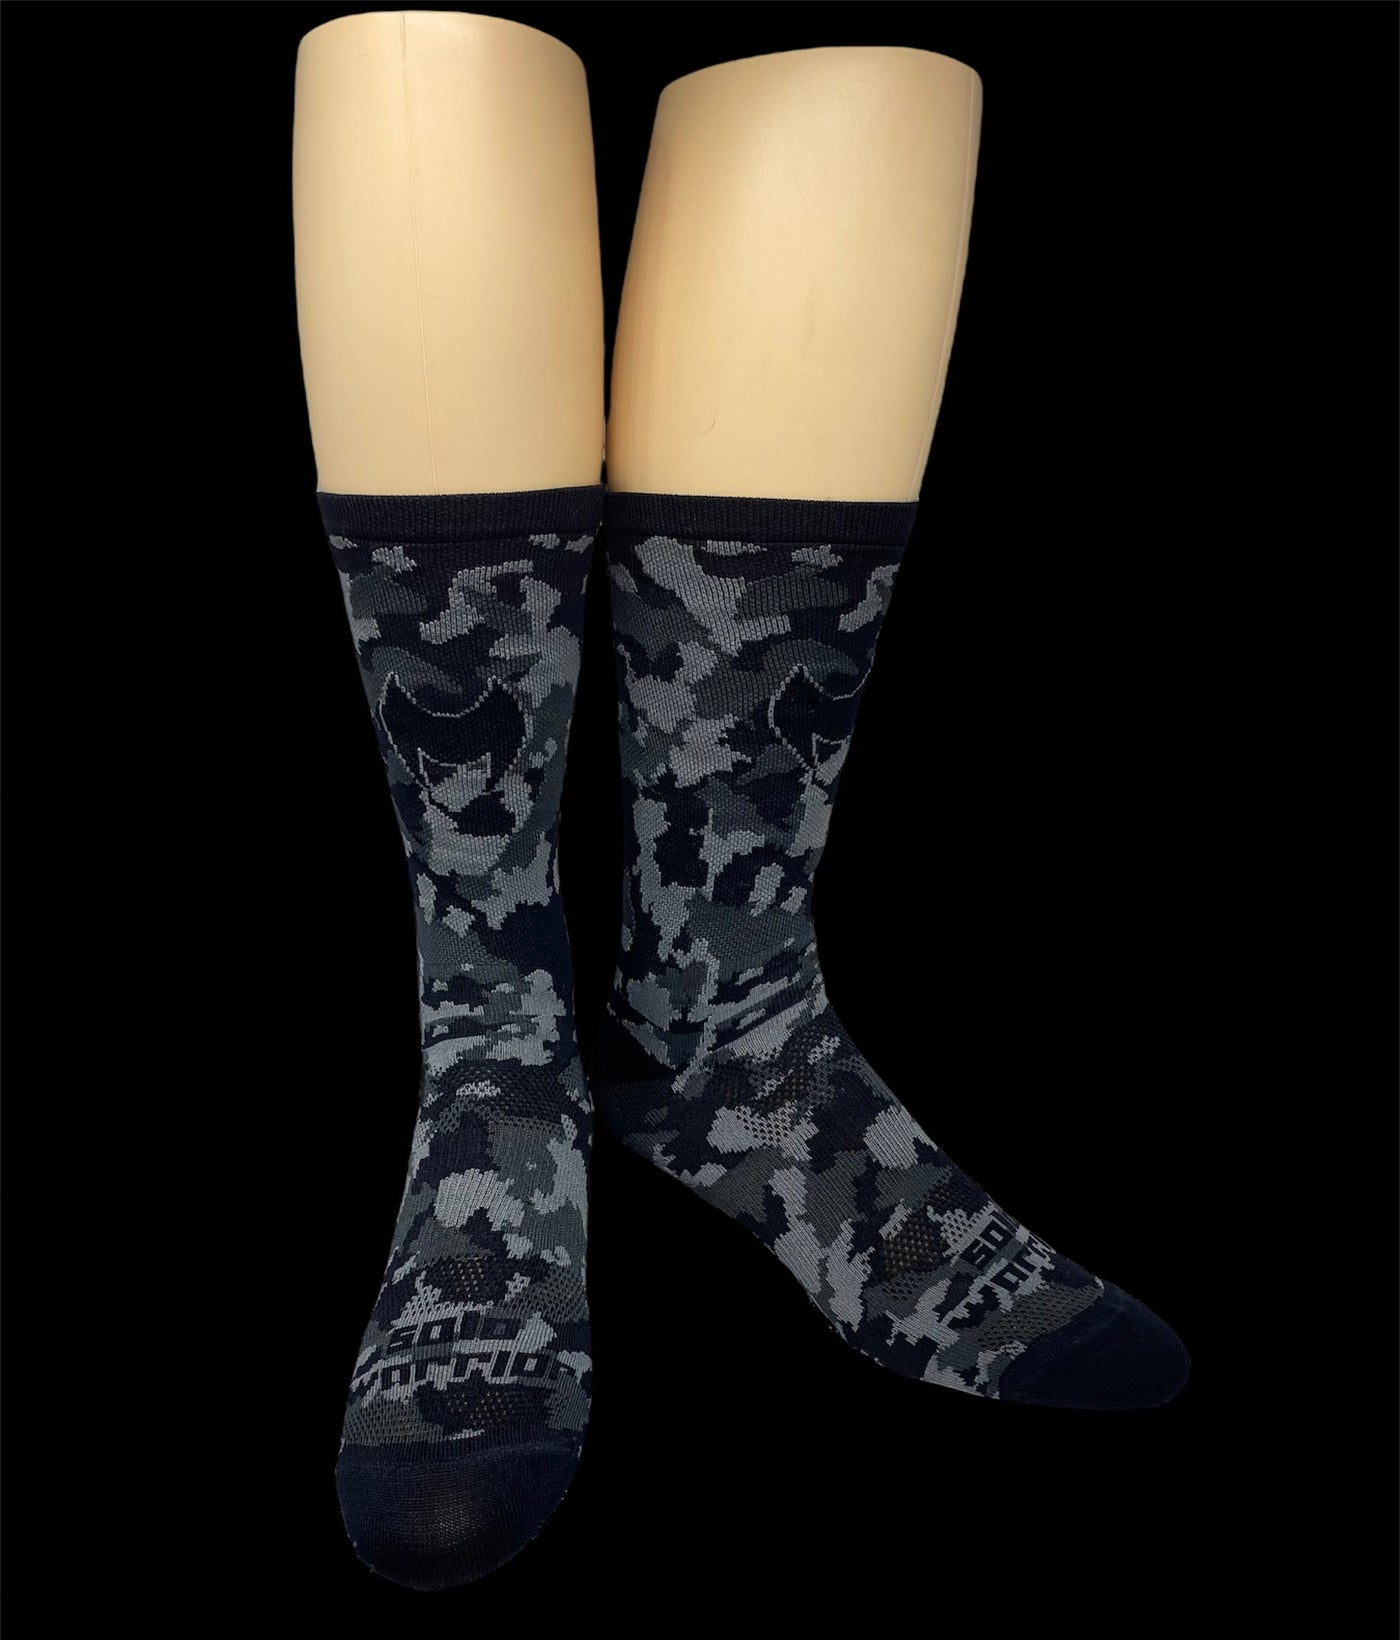 The 2.0 Black Camo  6" Men's and Women's cycling sock with compression.